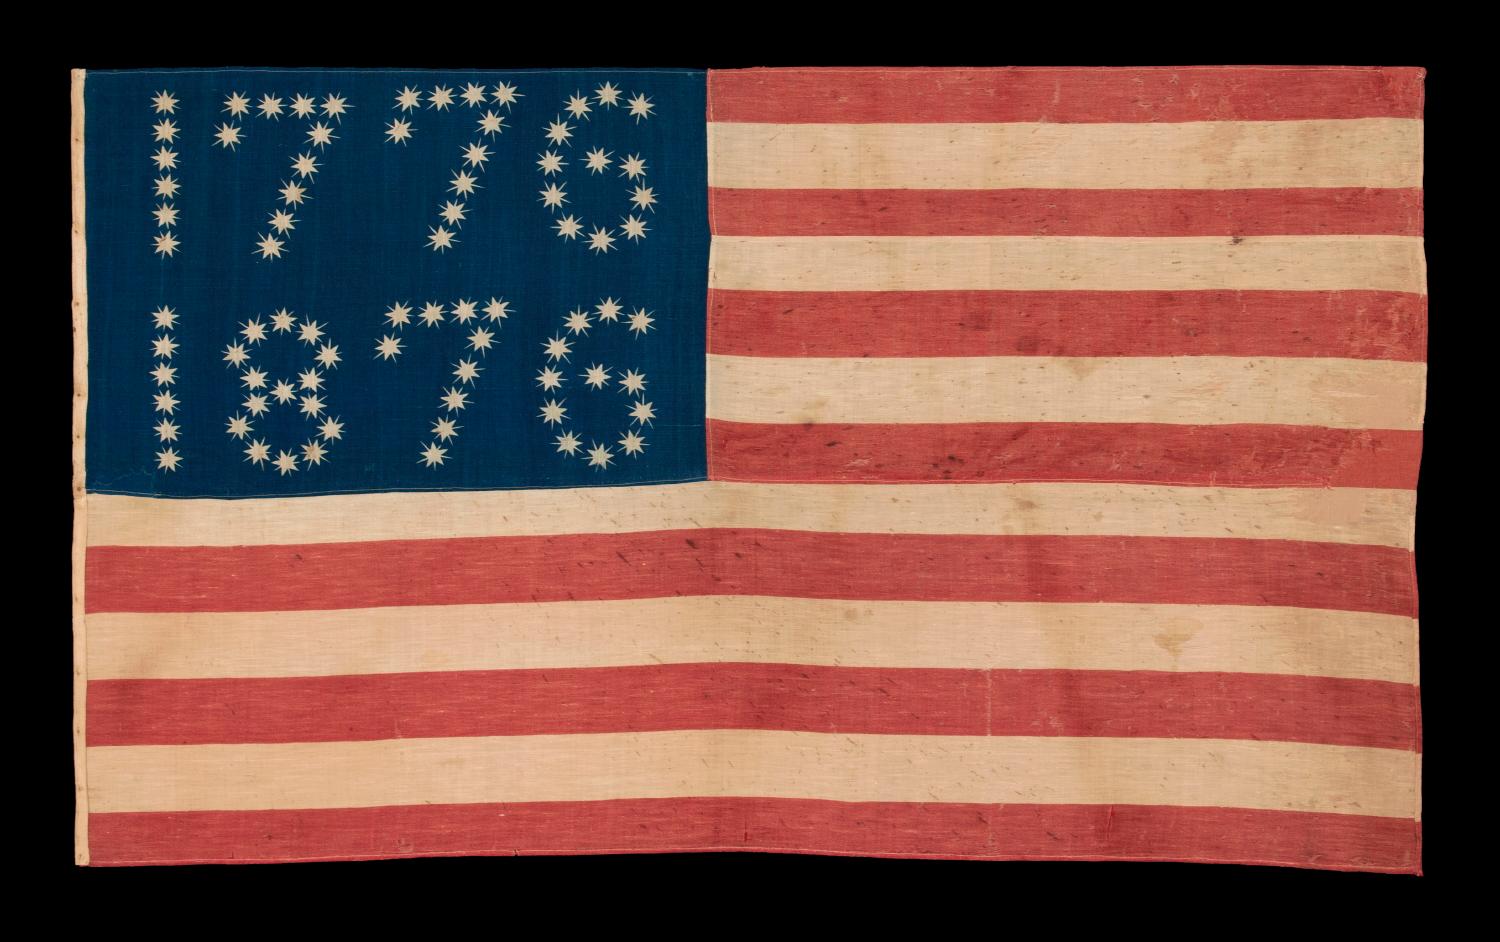 Antique American flag with 10-pointed stars that spell “1776 – 1876”, made for the 100-year anniversary of American Independence, one of the most graphic of all early examples:

Many fantastic star patterns were made in the patriotism that